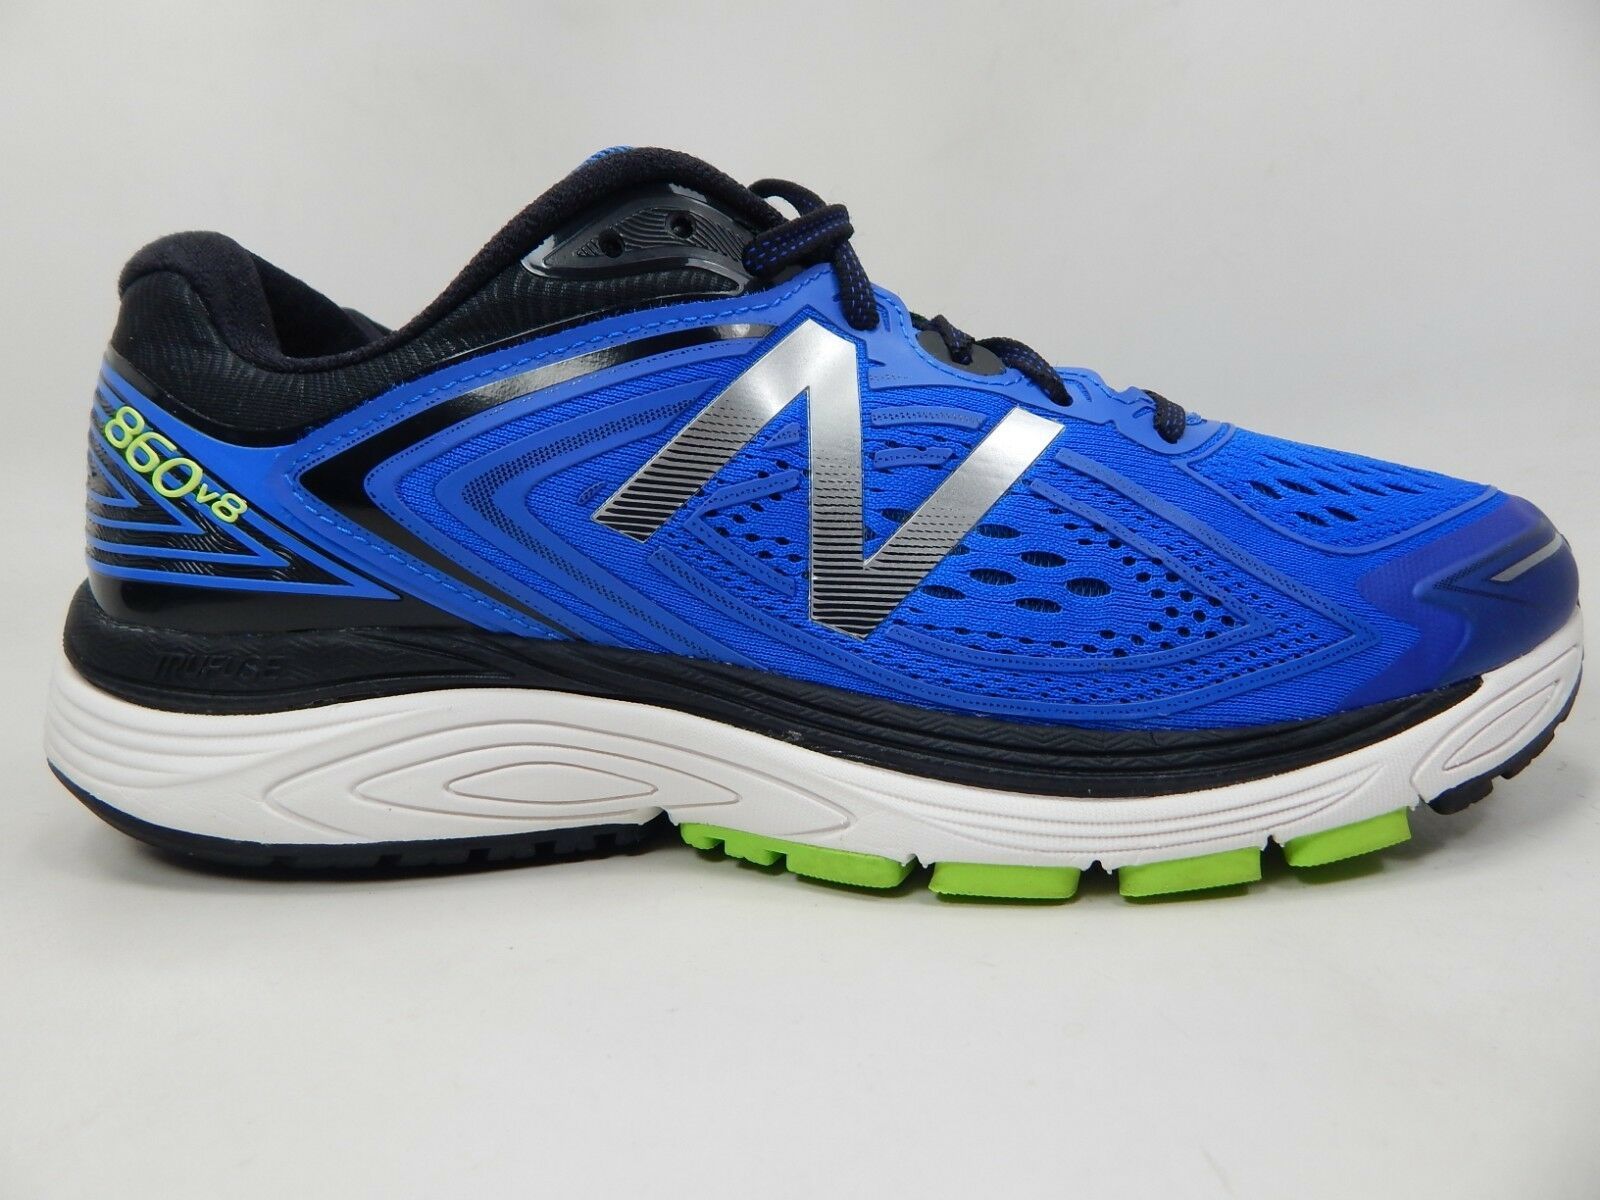 New balance 860 v8 Taille US 10 M (D) Eu 44 Homme Chaussures Course ...